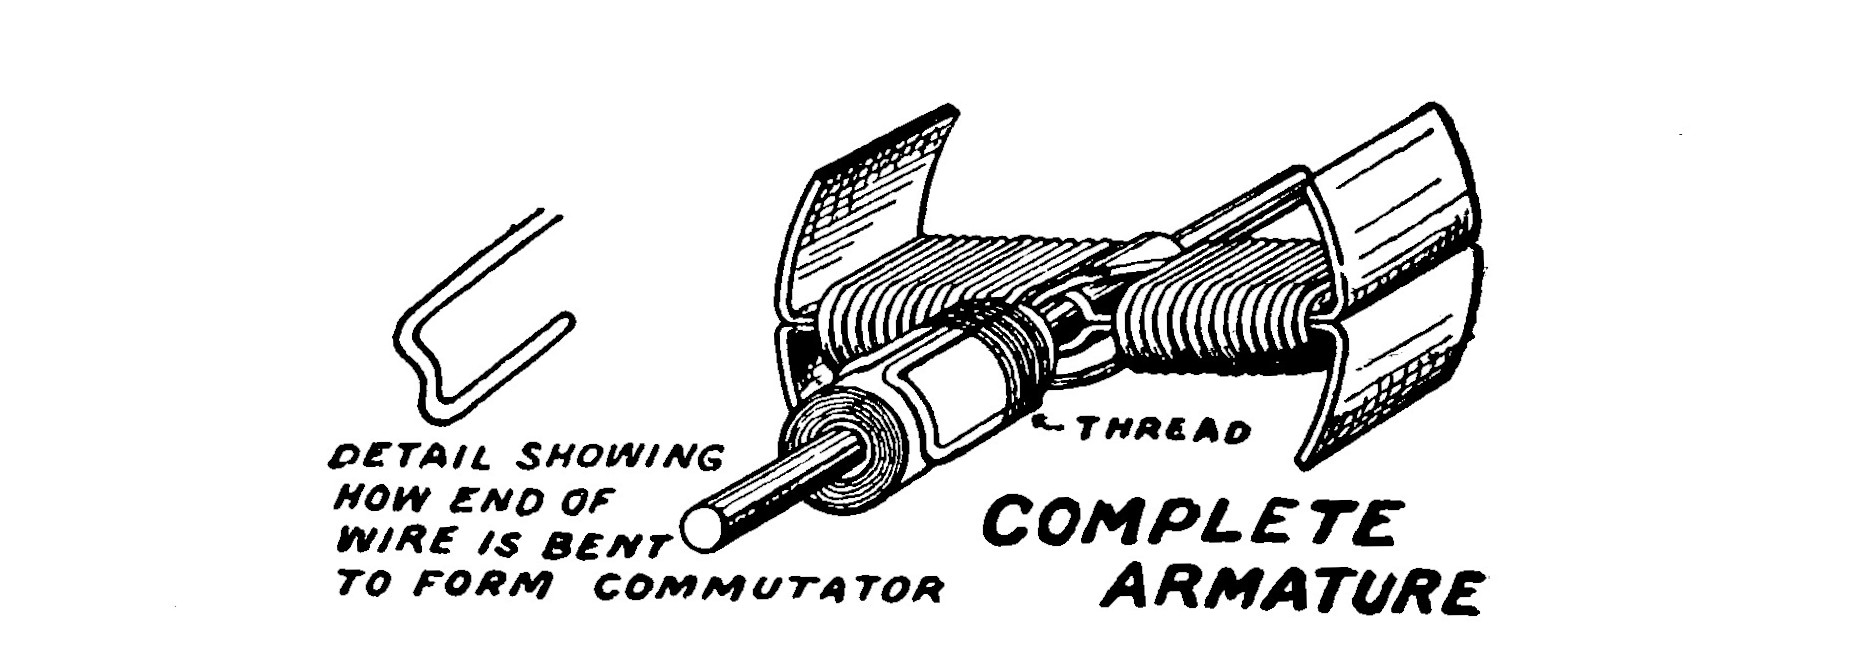 FIG. 17.—The completed Armature showing how the Commutator is constructed.